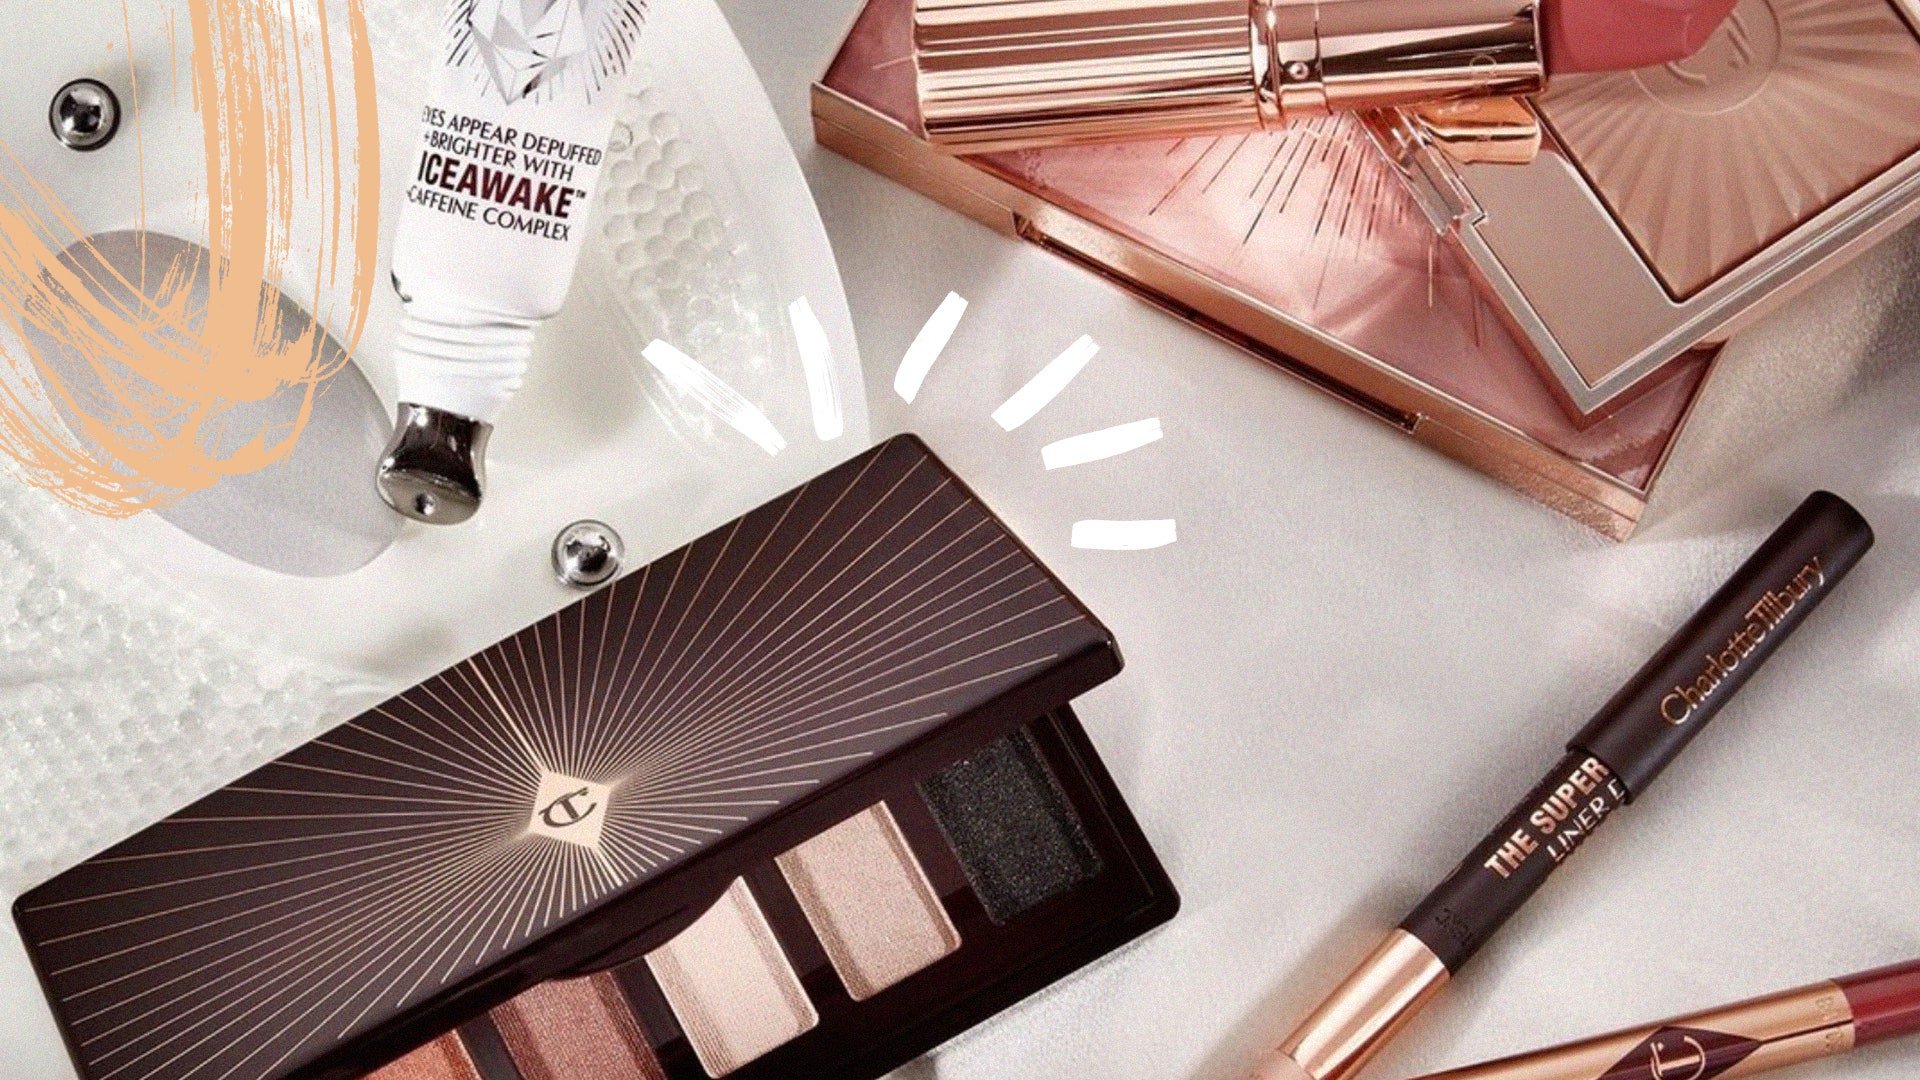 Charlotte Tilbury's Black Friday sale ends at midnight tonight, so don't miss 40% off makeup kits and £15 mystery products